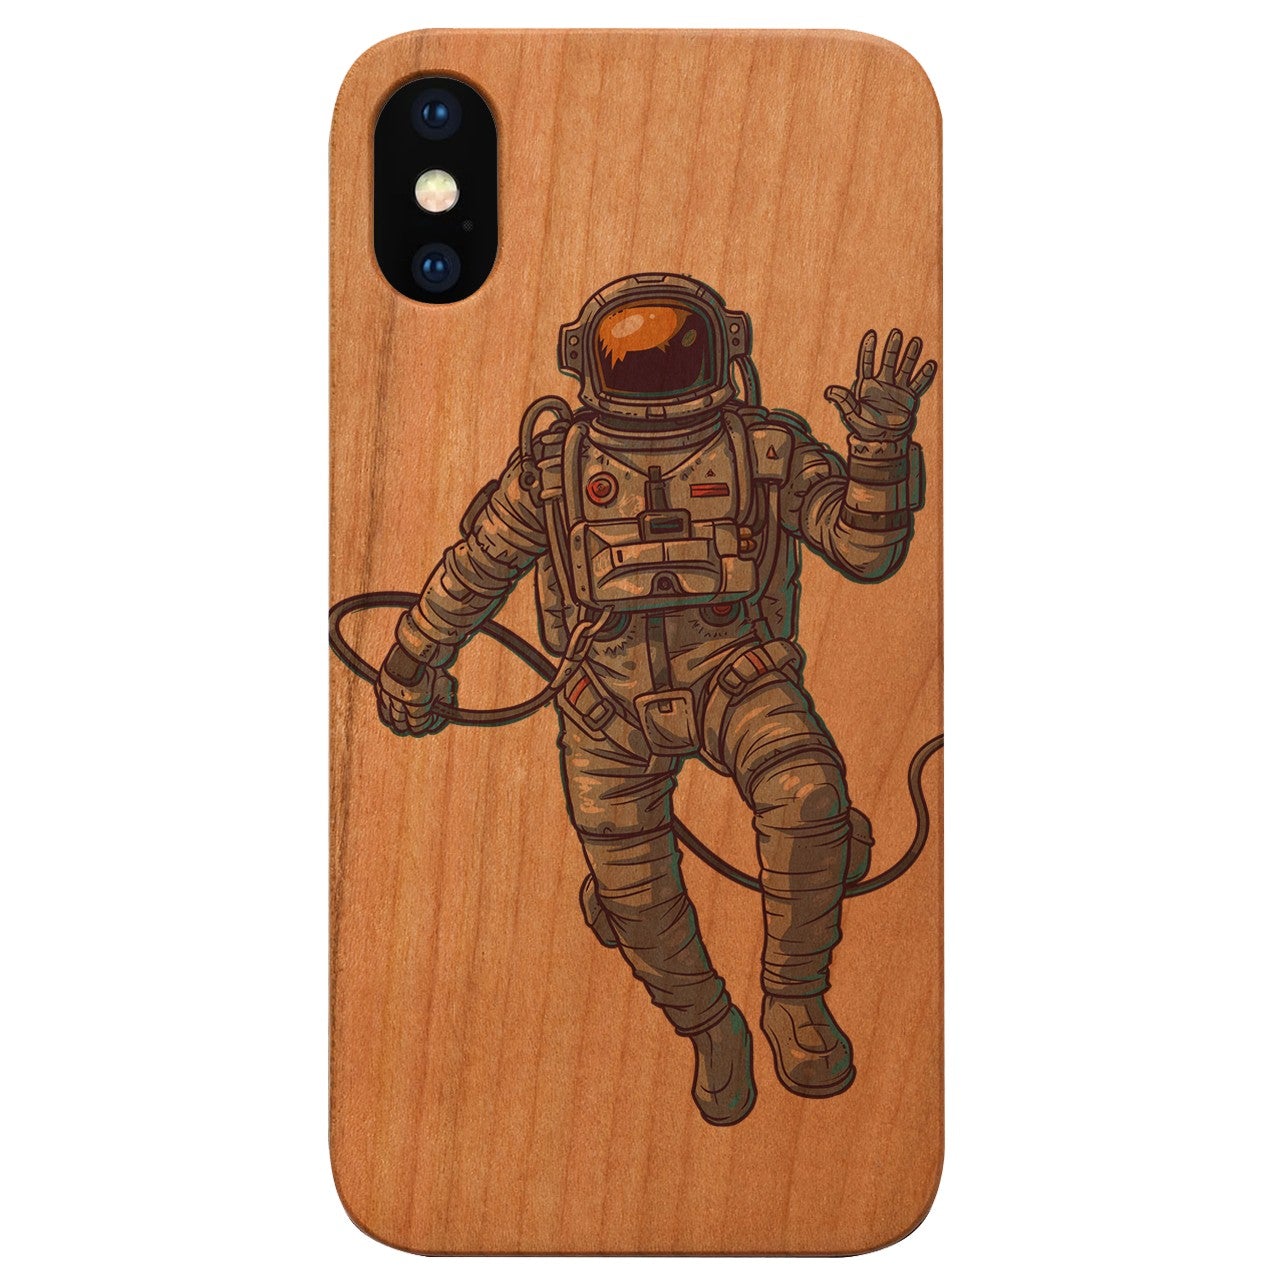  Astronaut - Engraved - Wooden Phone Case - IPhone 13 Models